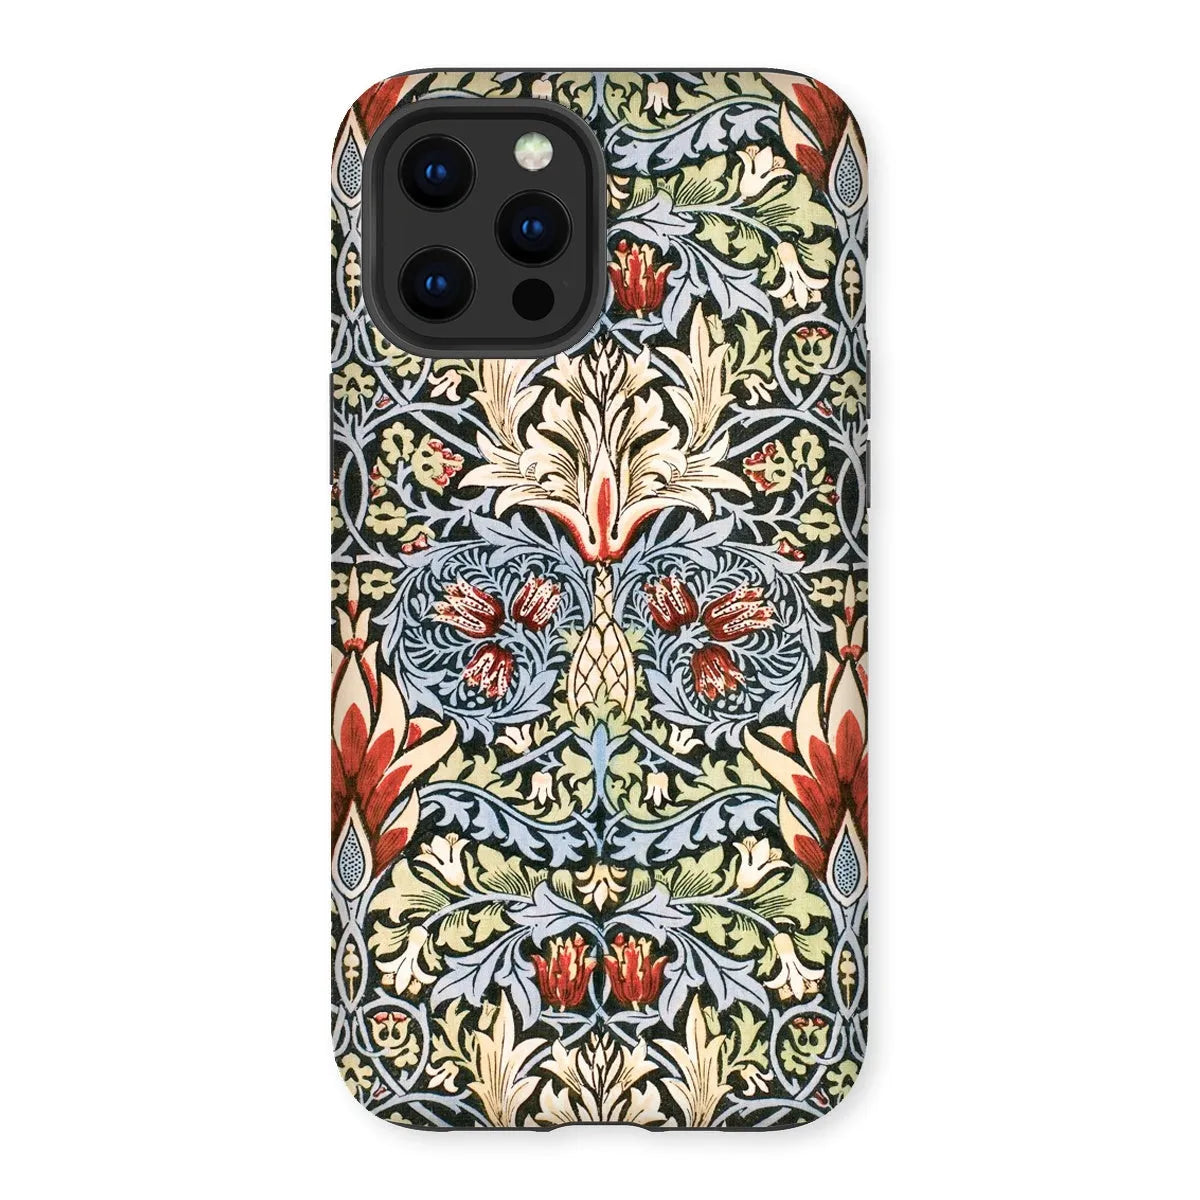 Snakeshead - Arts And Crafts Pattern Phone Case - William Morris - Iphone 12 Pro Max / Matte - Mobile Phone Cases